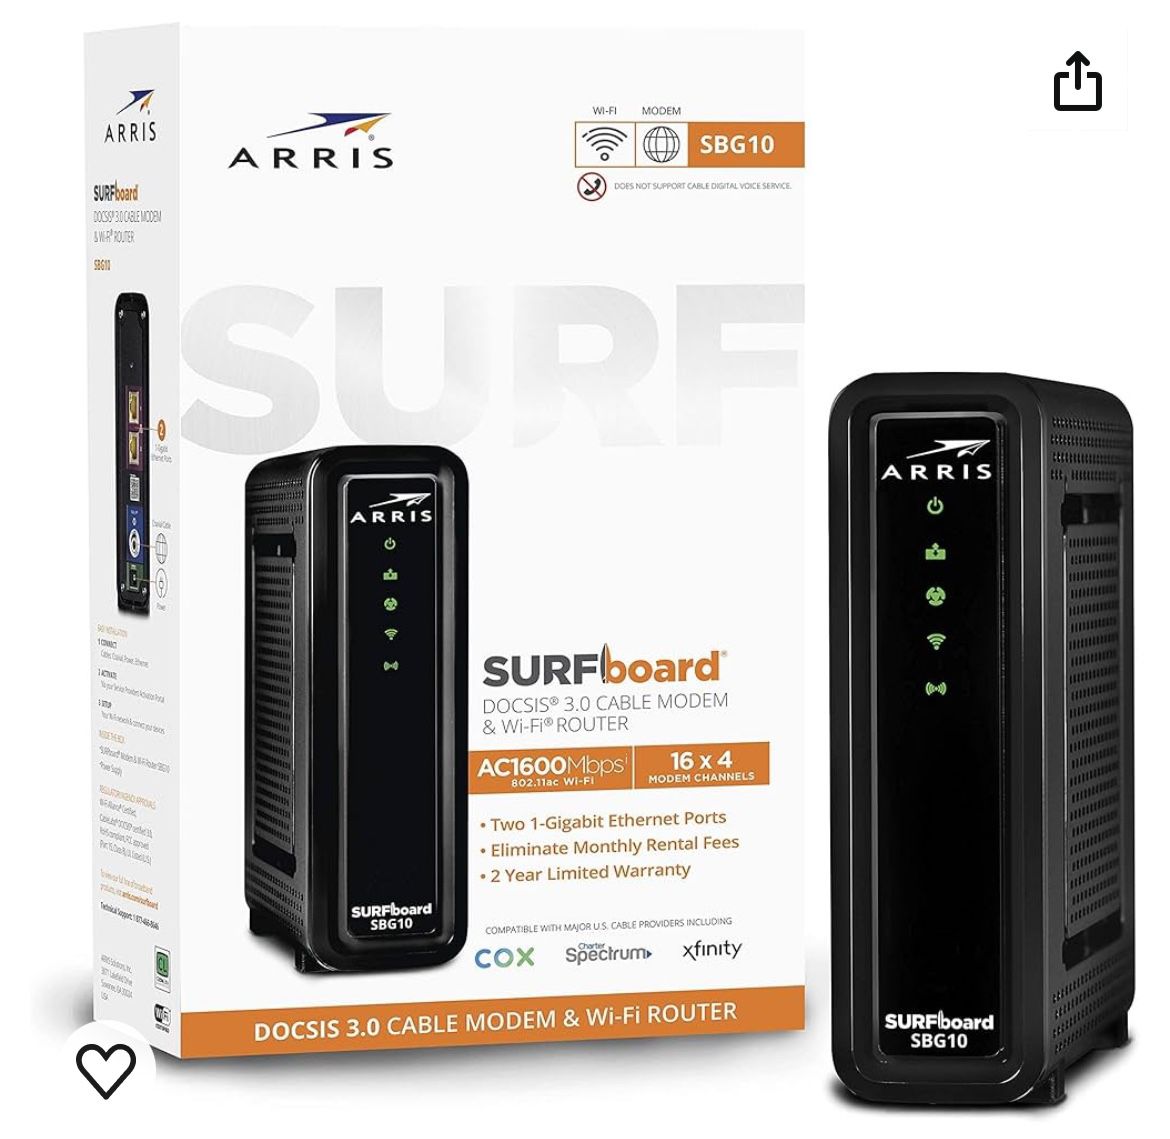 arris surfboard ac1600 dual band router with 16x4 docsis 3.0 cable modem black 